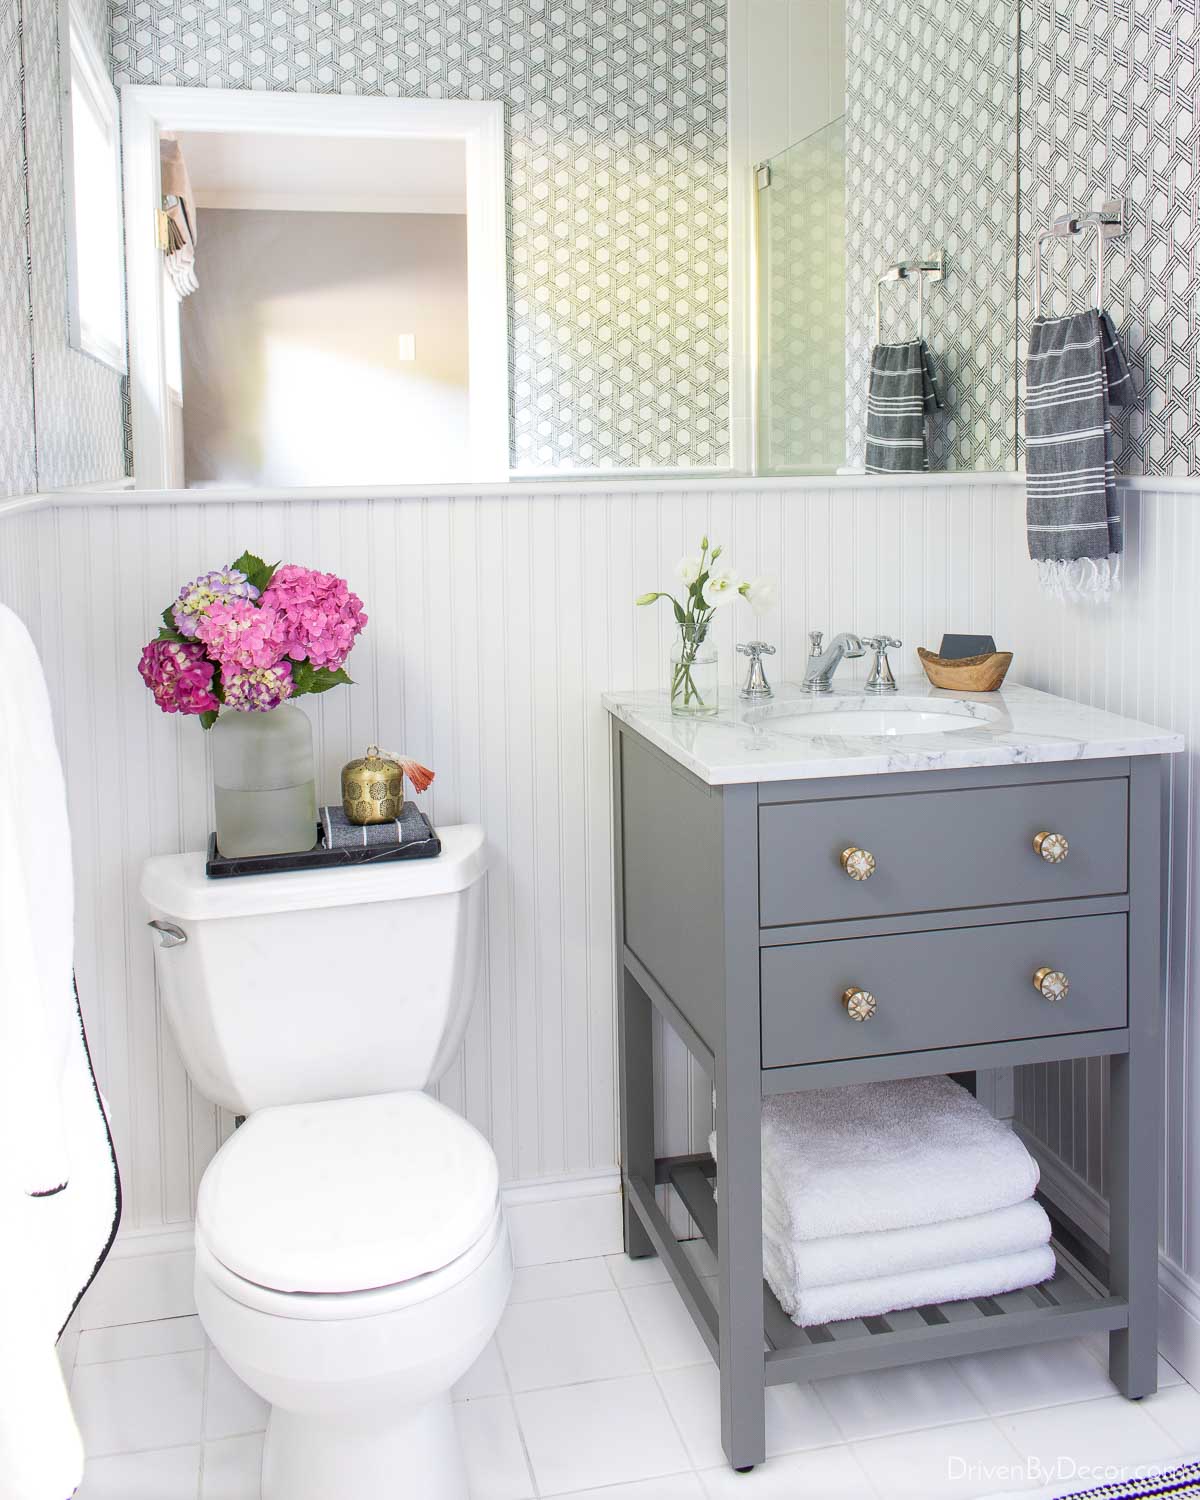 21 Bathroom Storage Ideas for Even the Tiniest, Ickiest Spaces in